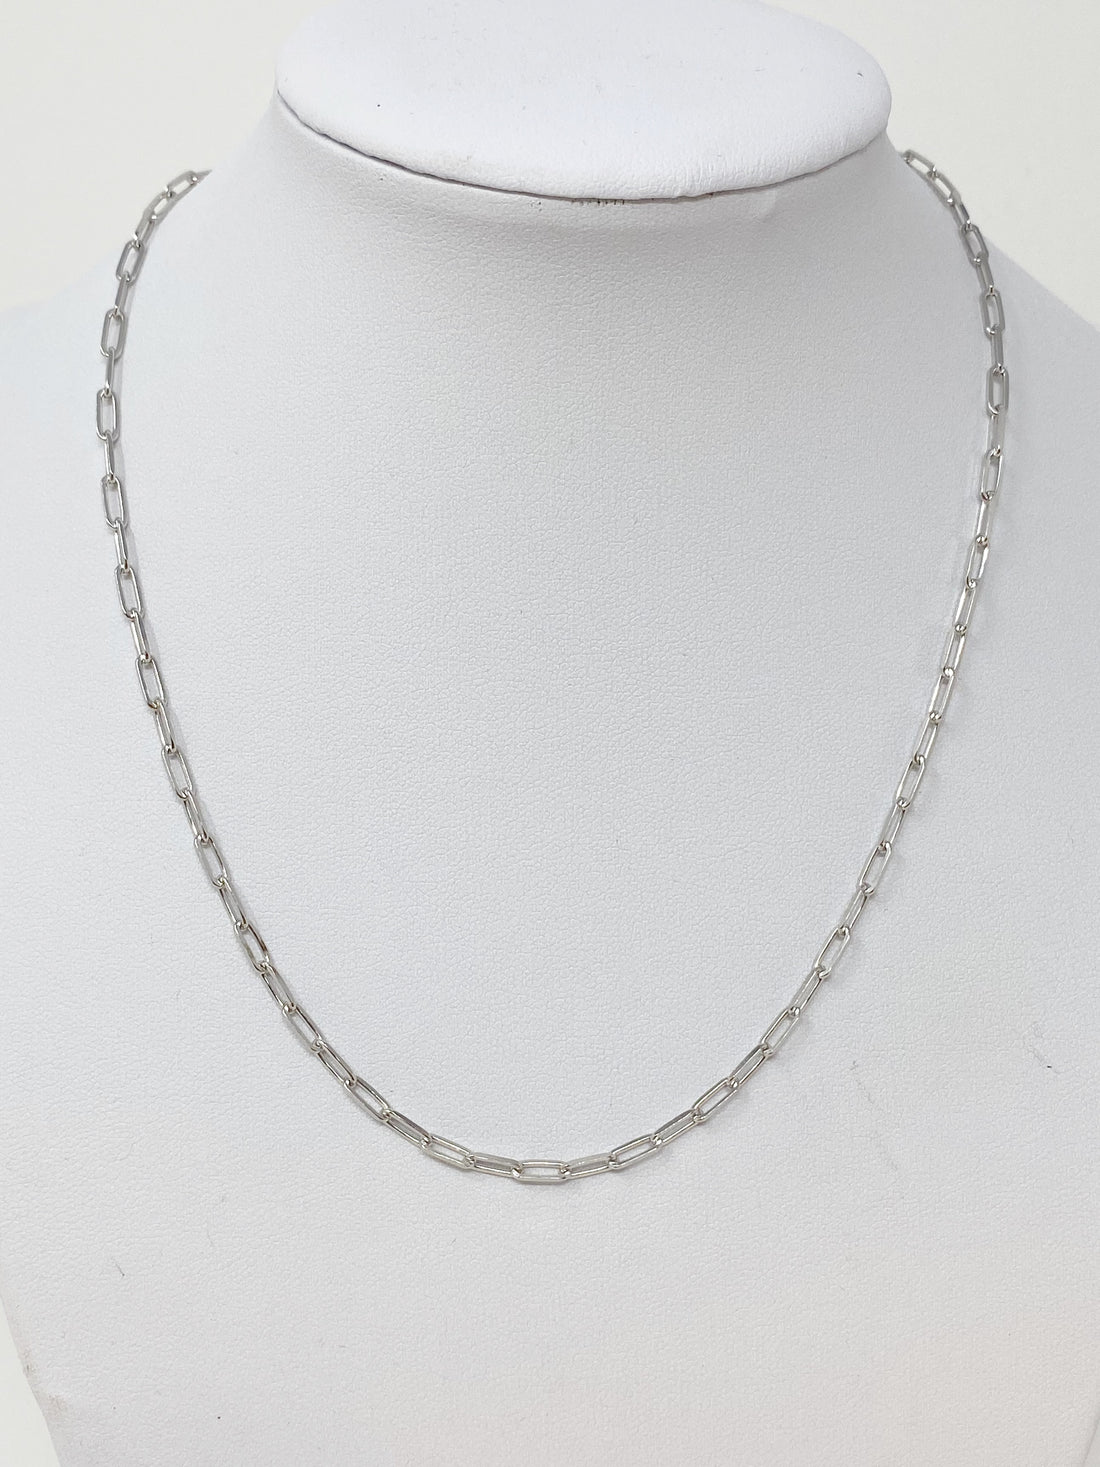 Charming Chainlink Necklace in Silver 16"